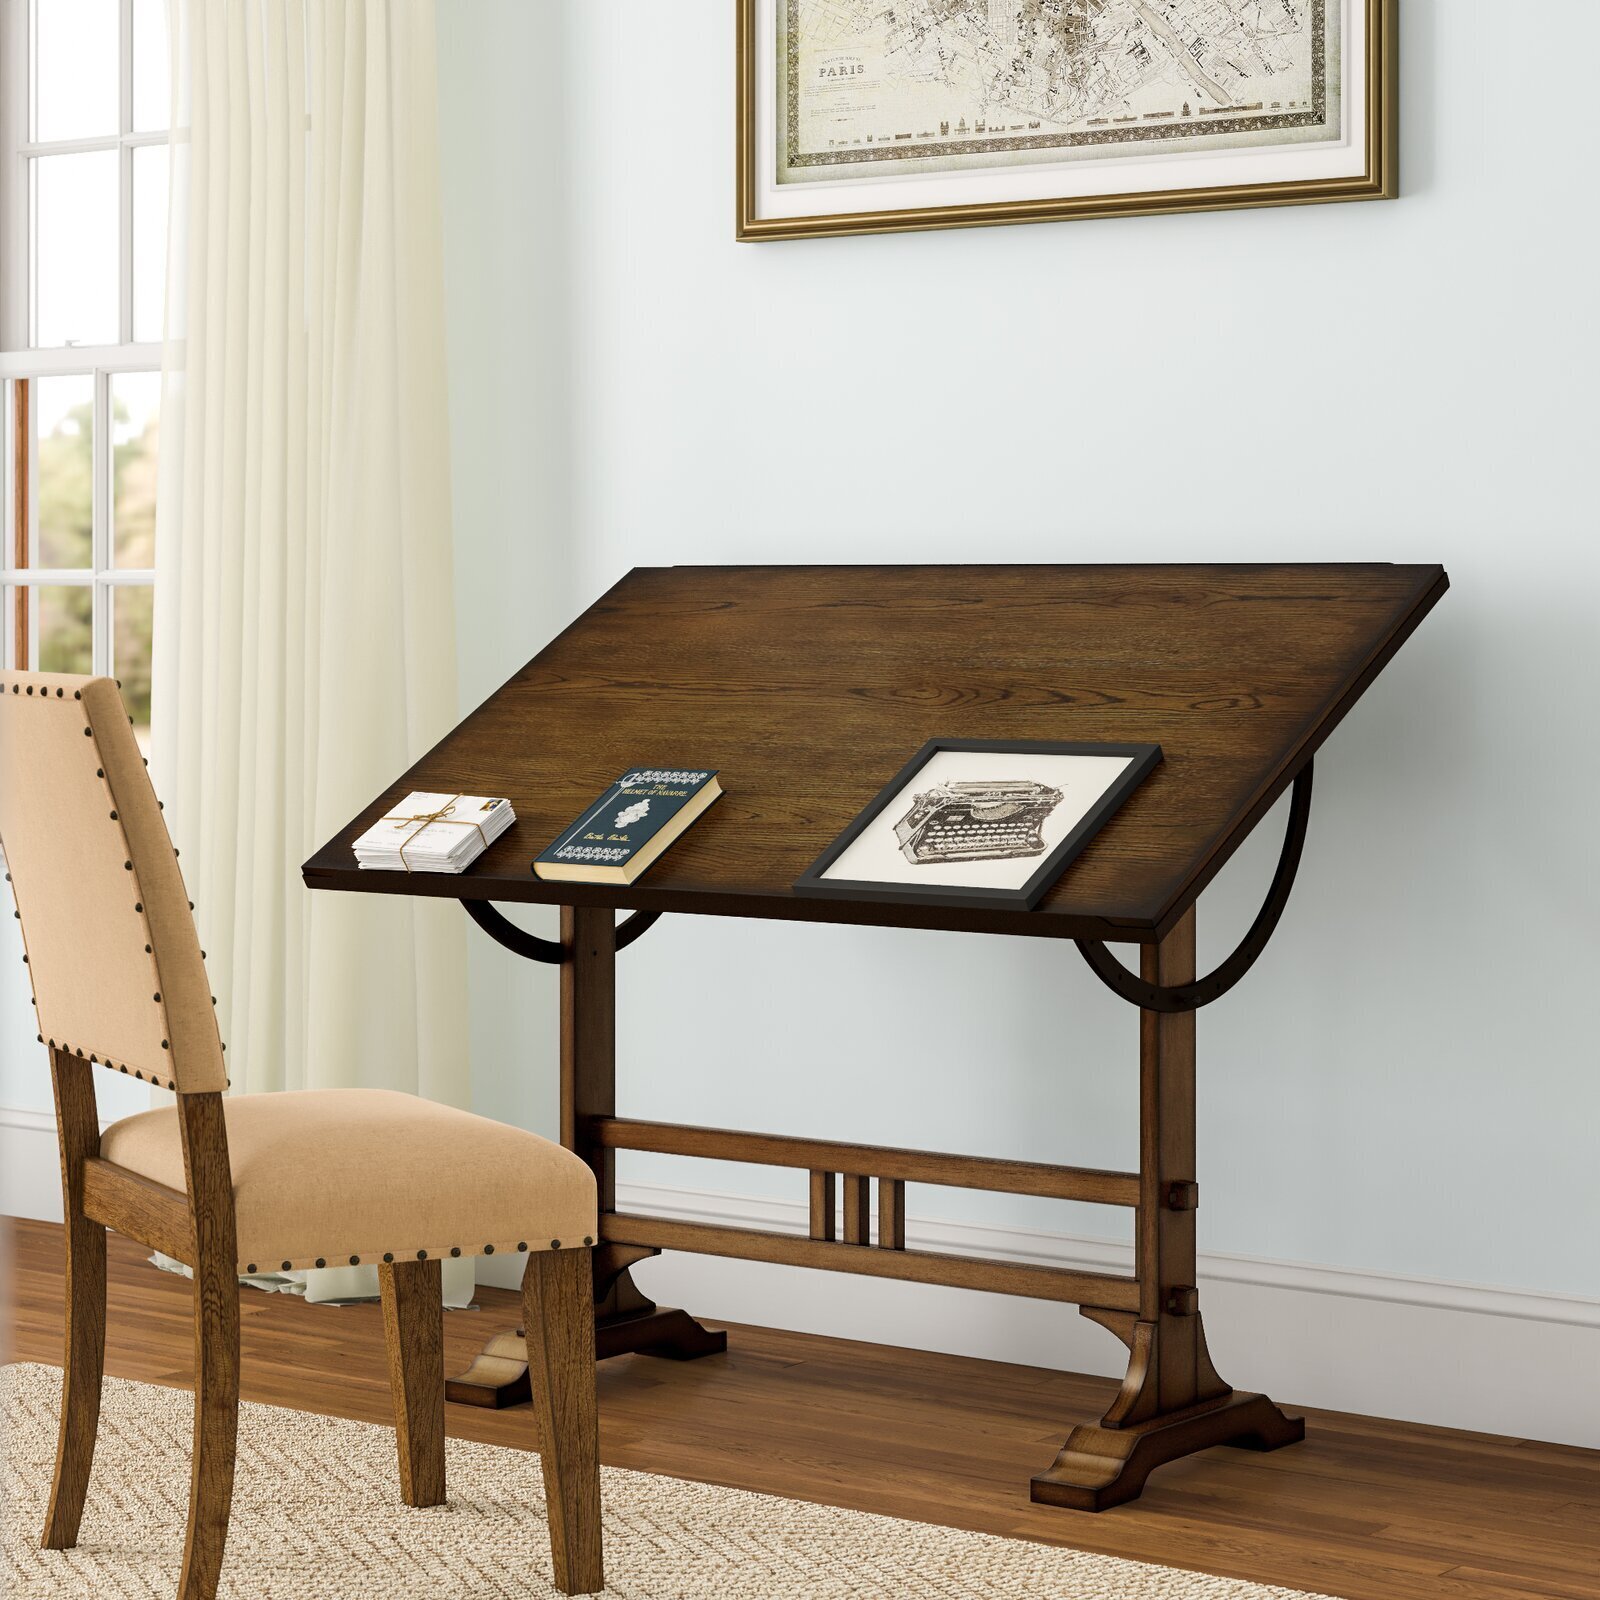 Rustic Old Drafting Table 